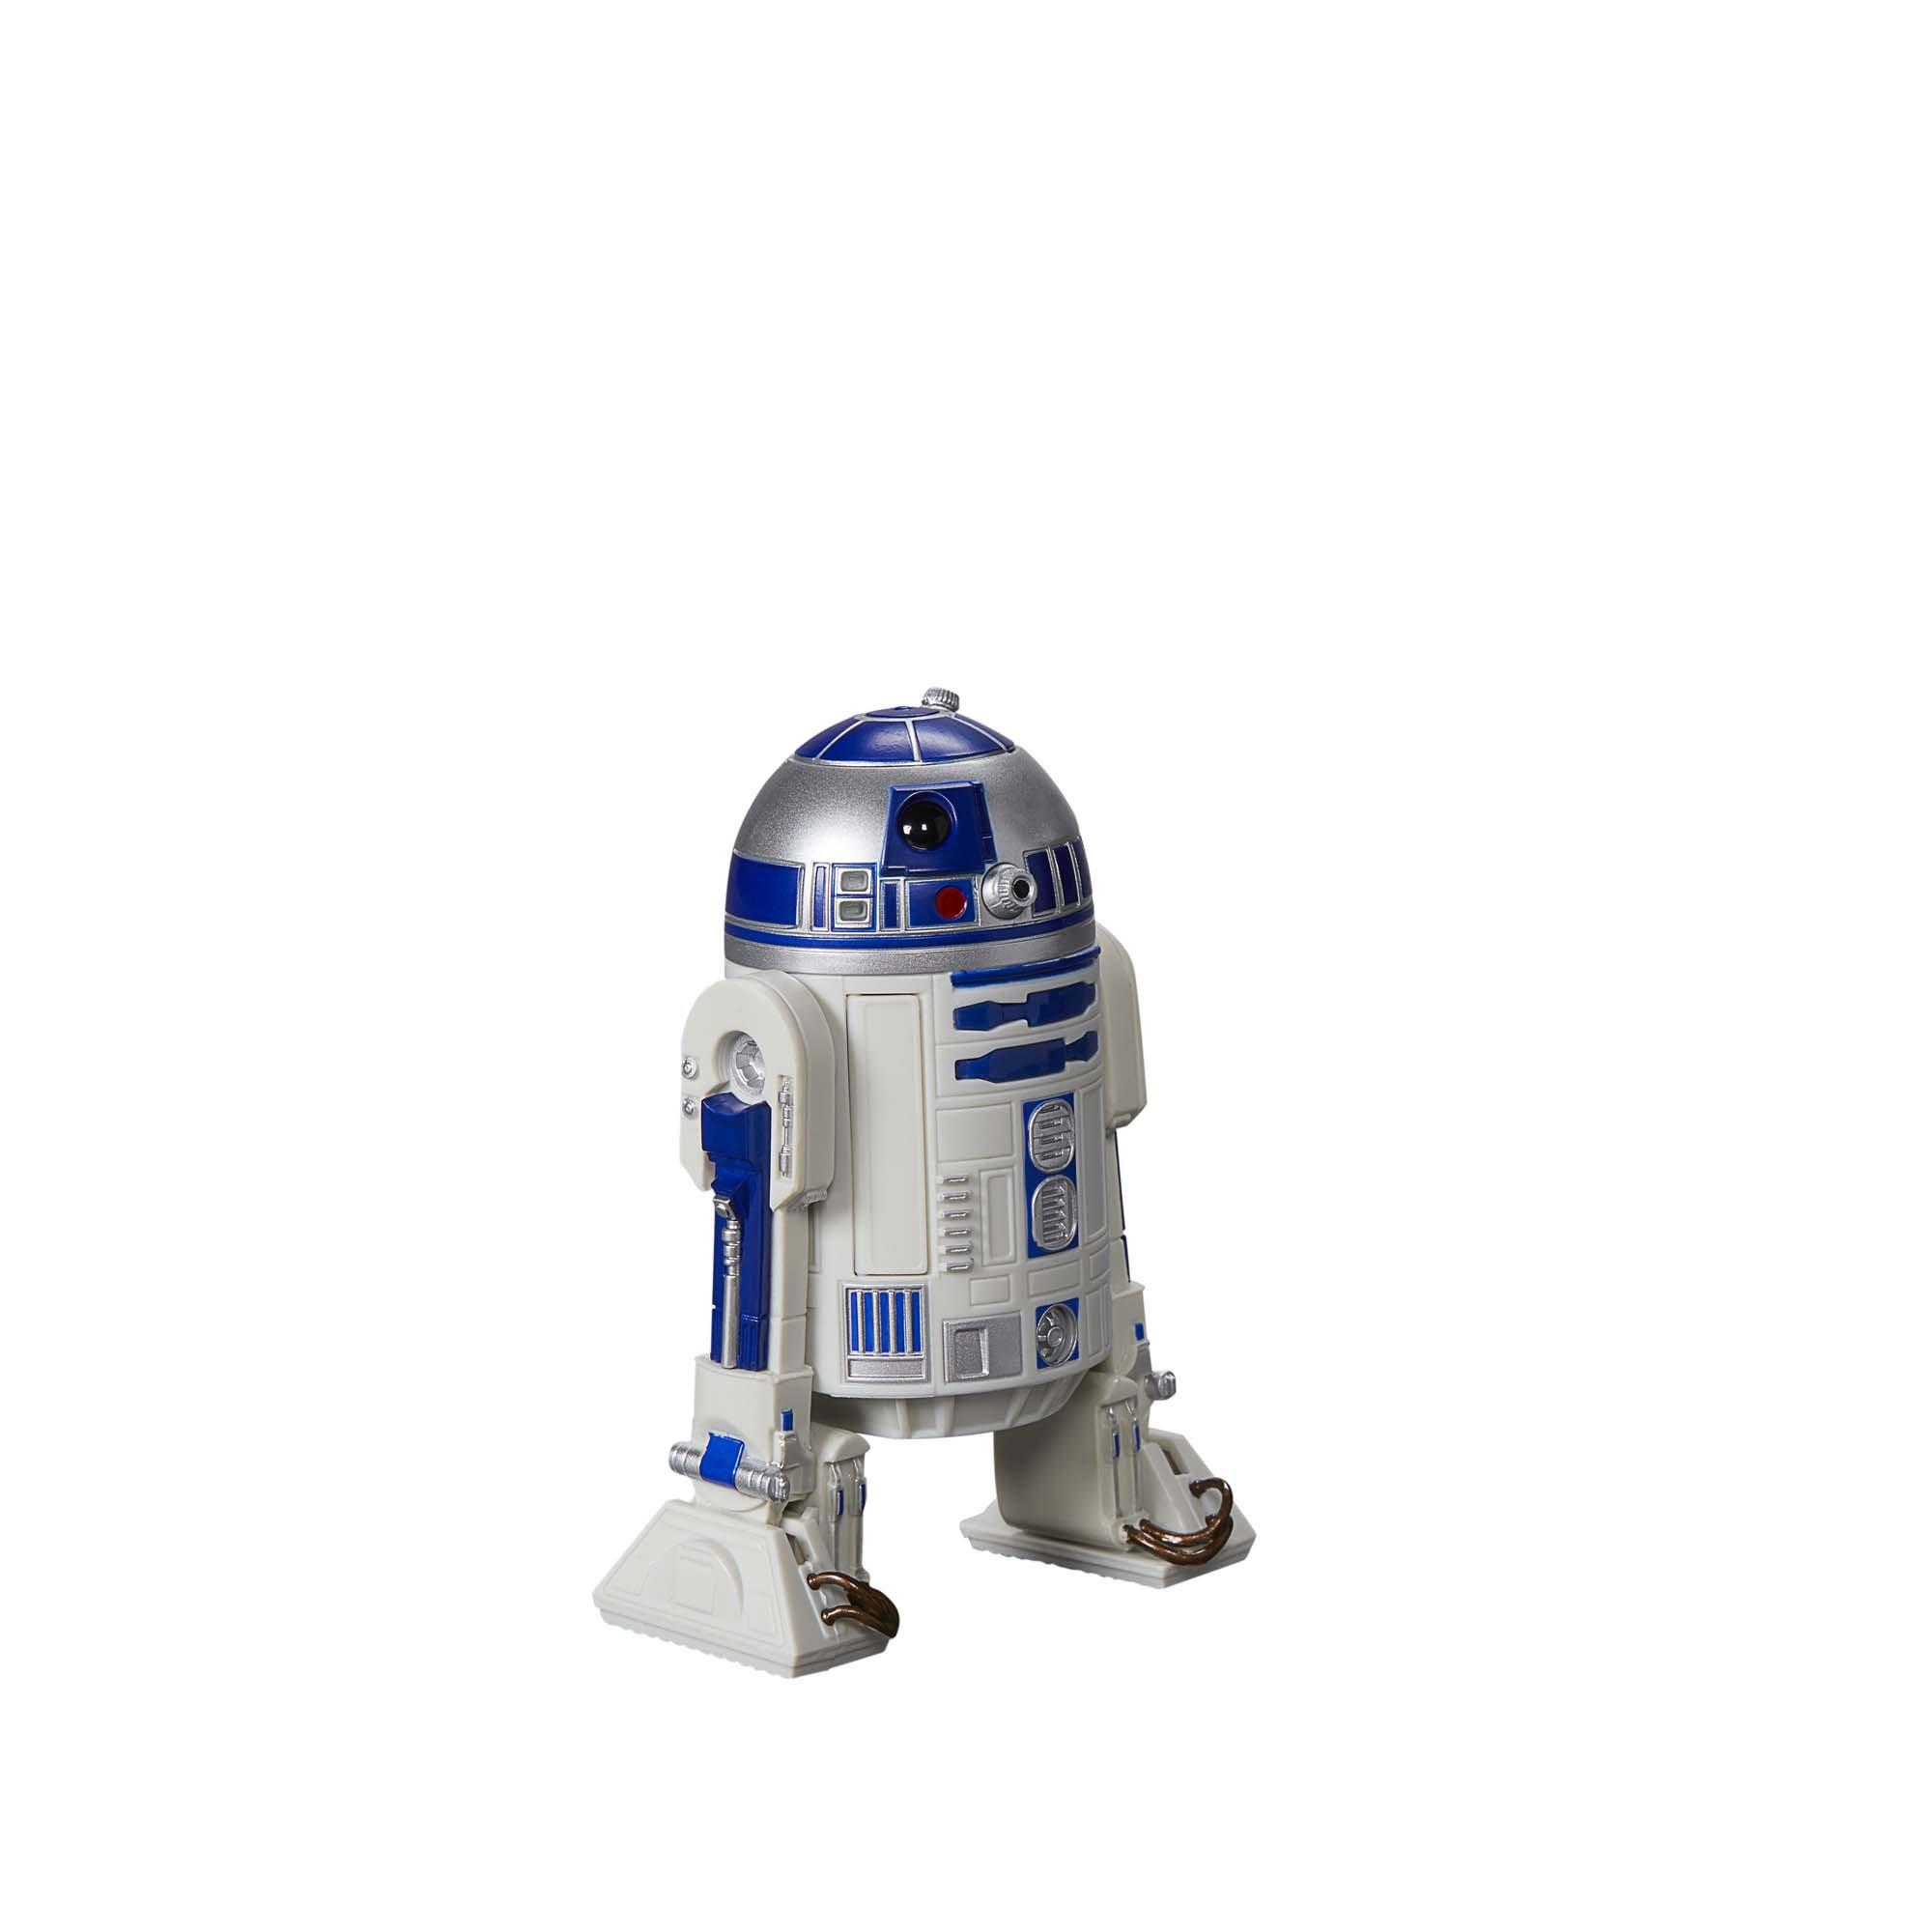 Star Wars: The Black Series R2-D2 (Artoo-Detoo) Kids Toy Action Figure for  Boys and Girls Ages 4 5 6 7 8 and Up (6”)